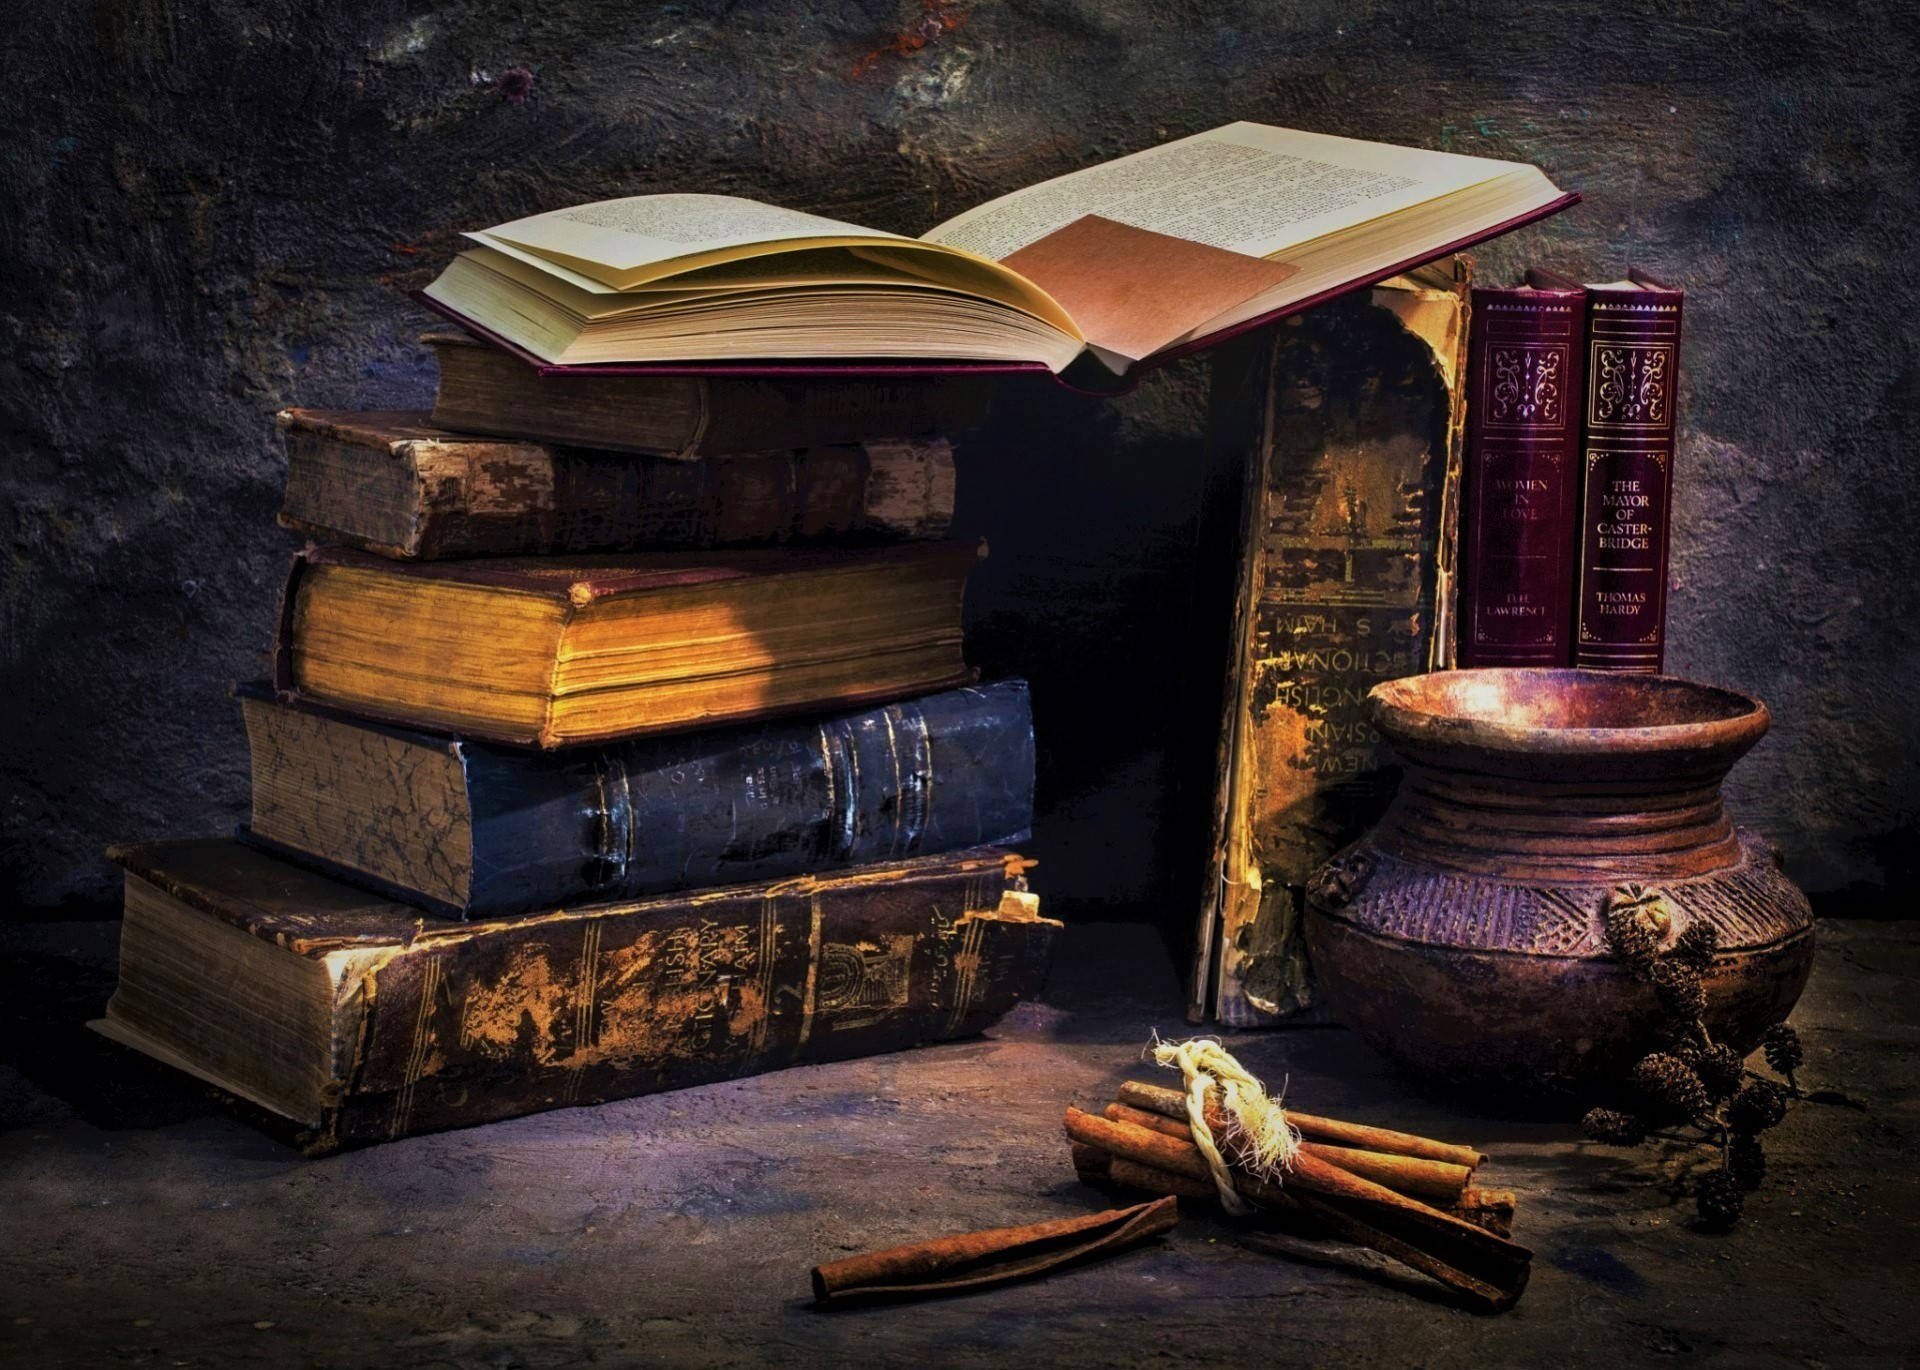 Vintage Bowl Accompanied by Aged Books Wallpaper